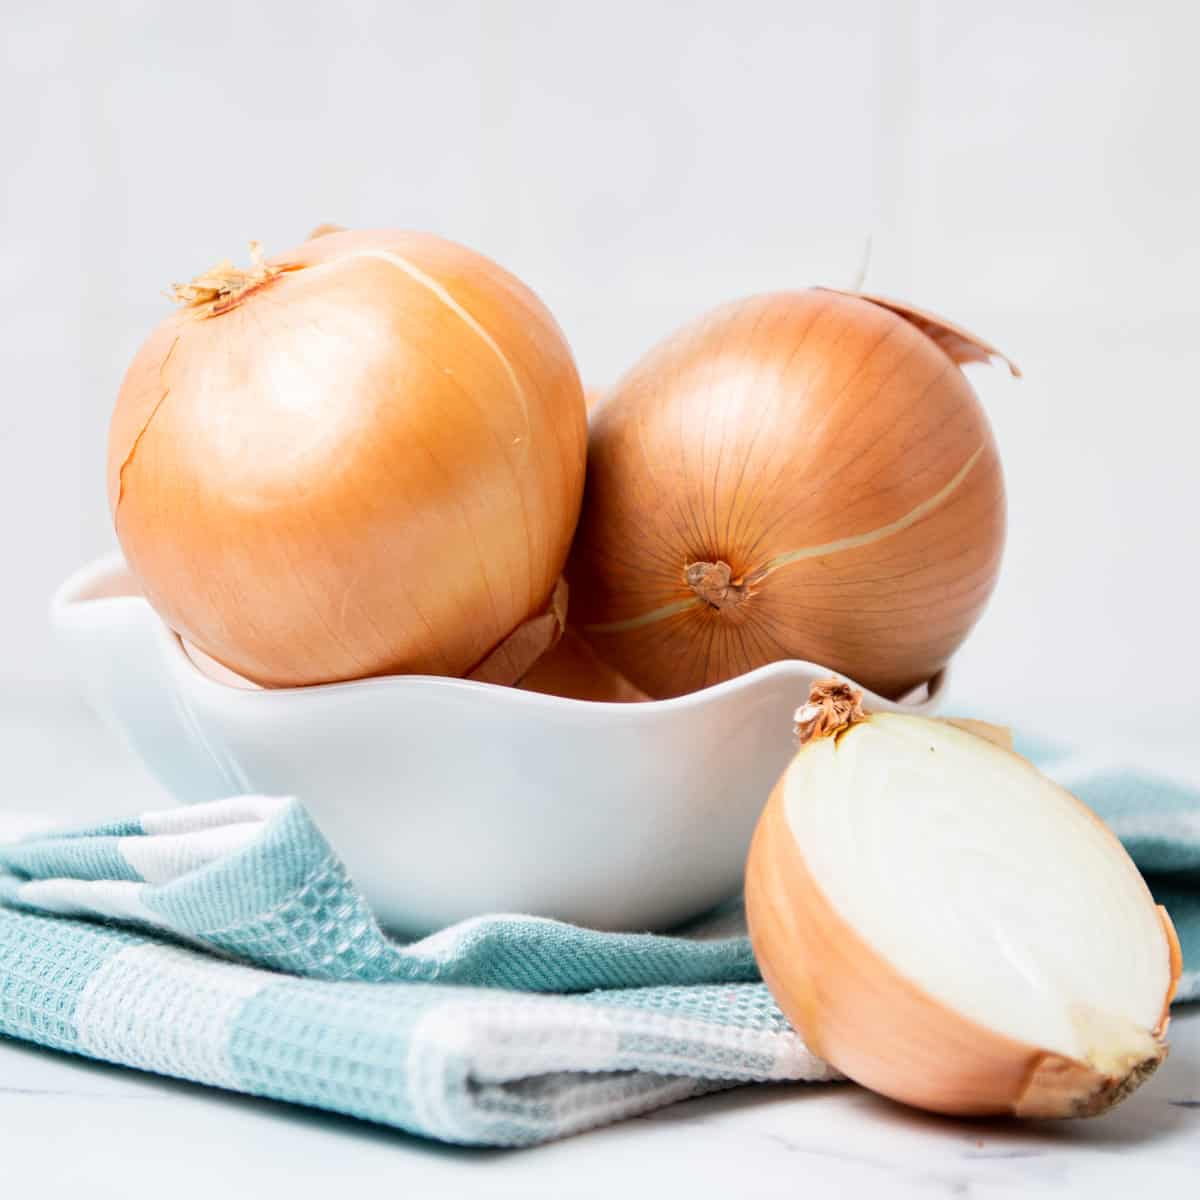 Onions in a white bowl on a white and blue kitchen towel with a single sliced onion.